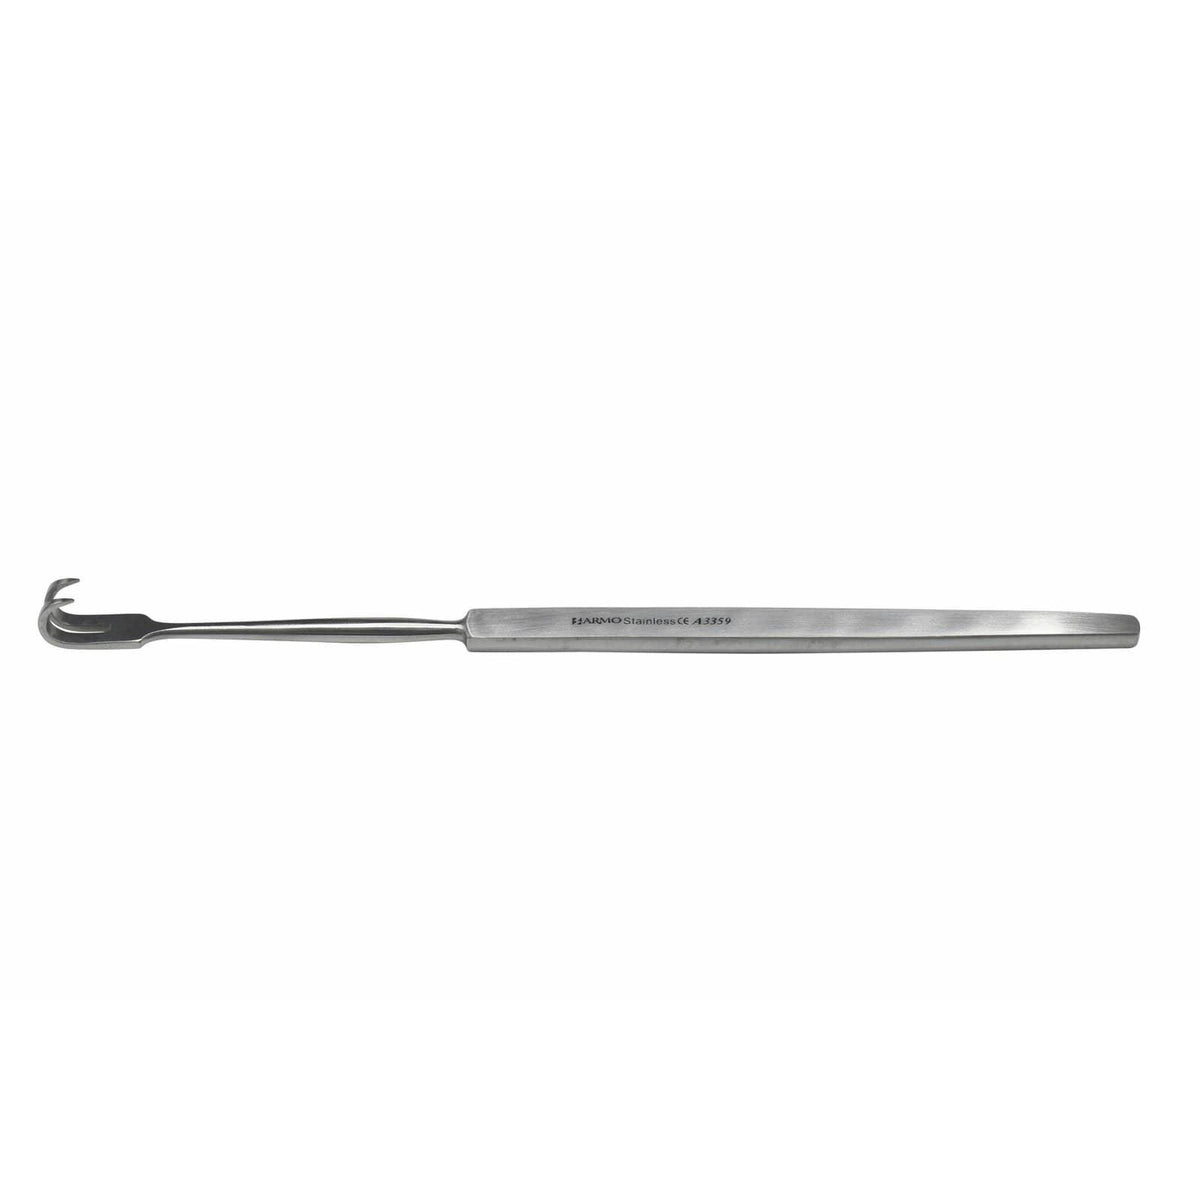 Armo Surgical Instruments 16cm / Straight 2 Prong / Sharp Armo Retractor Delicate